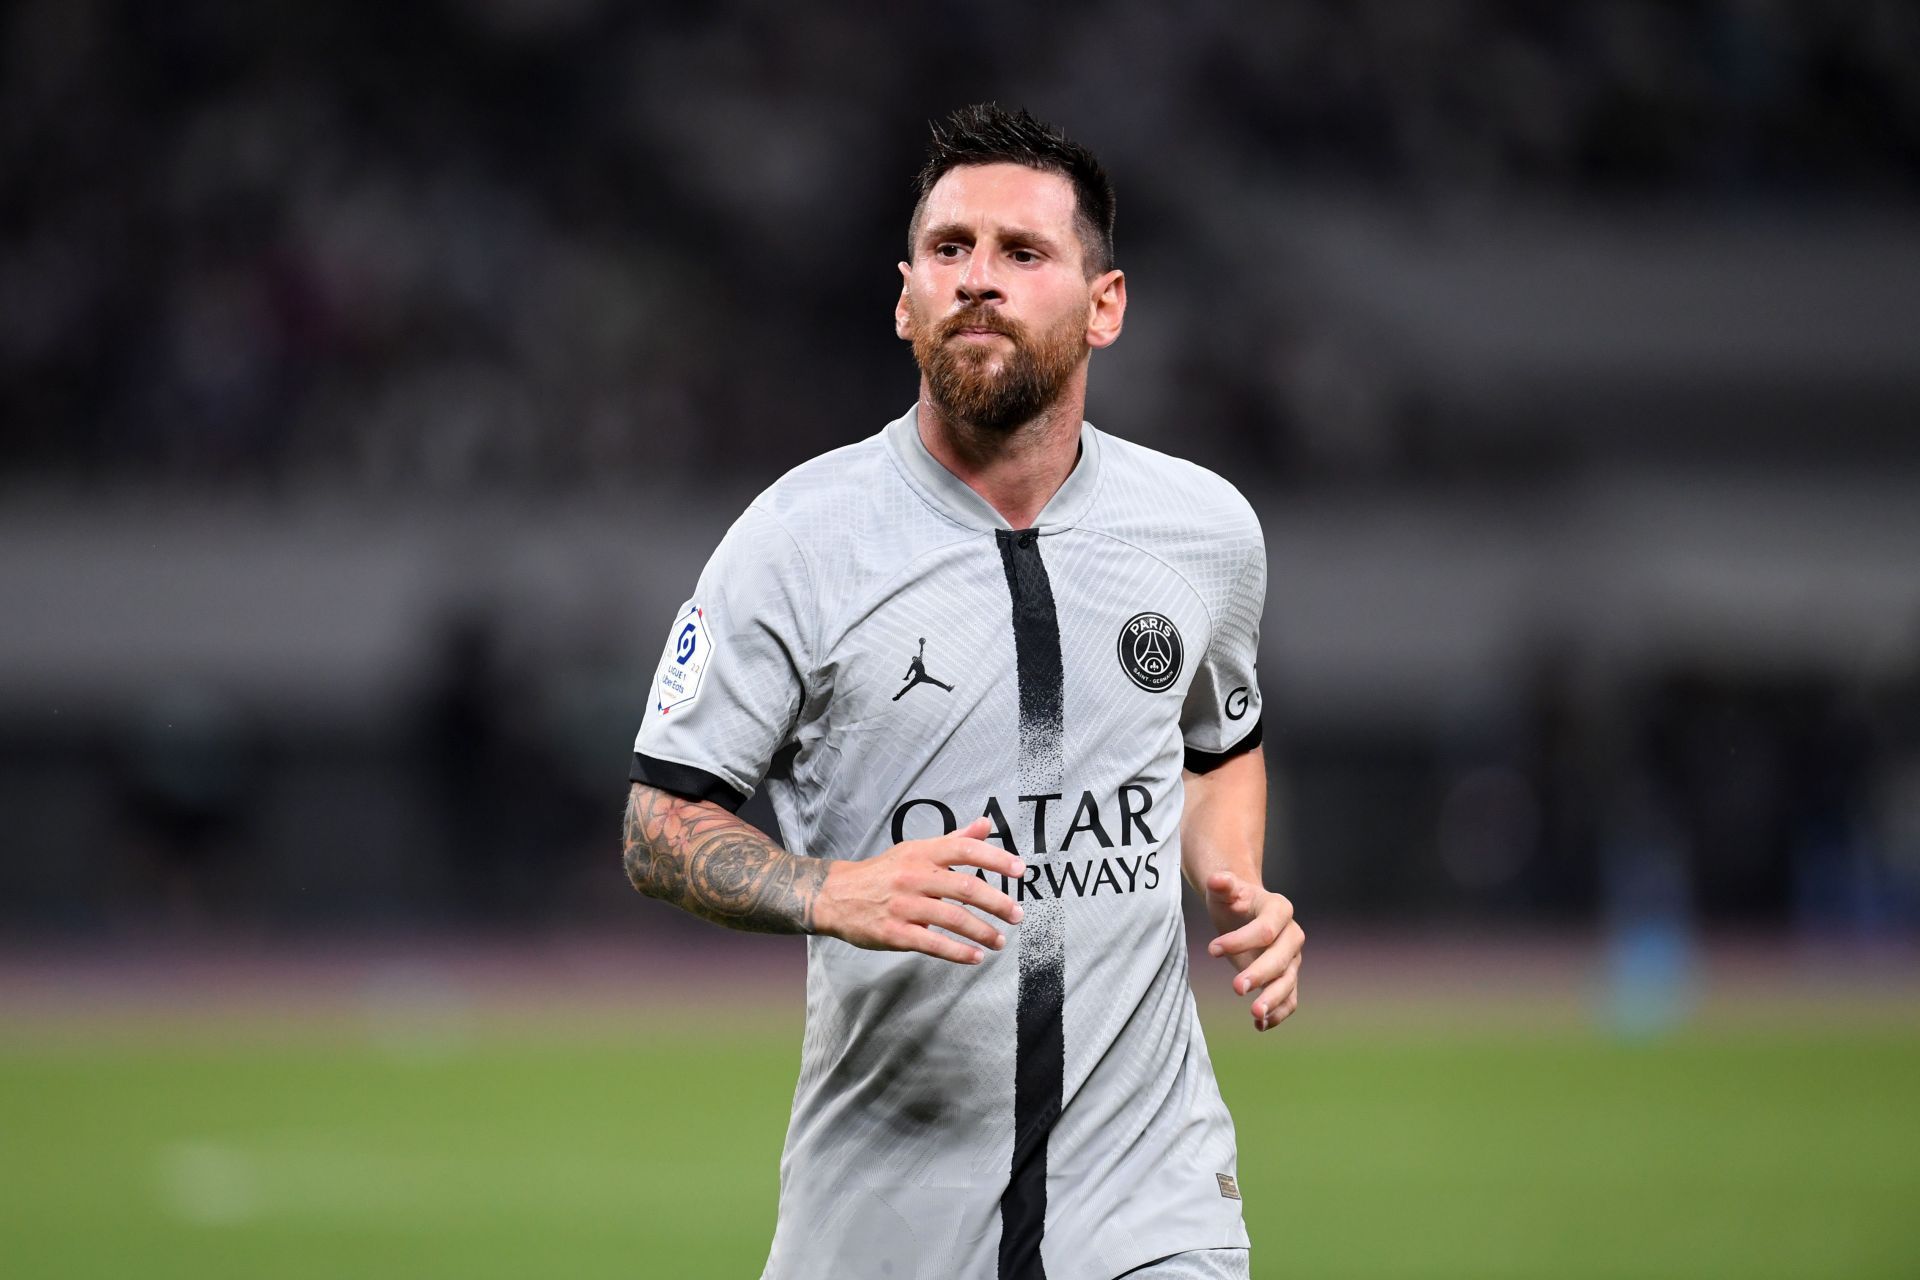 Lionel Messi magics up another stellar performance